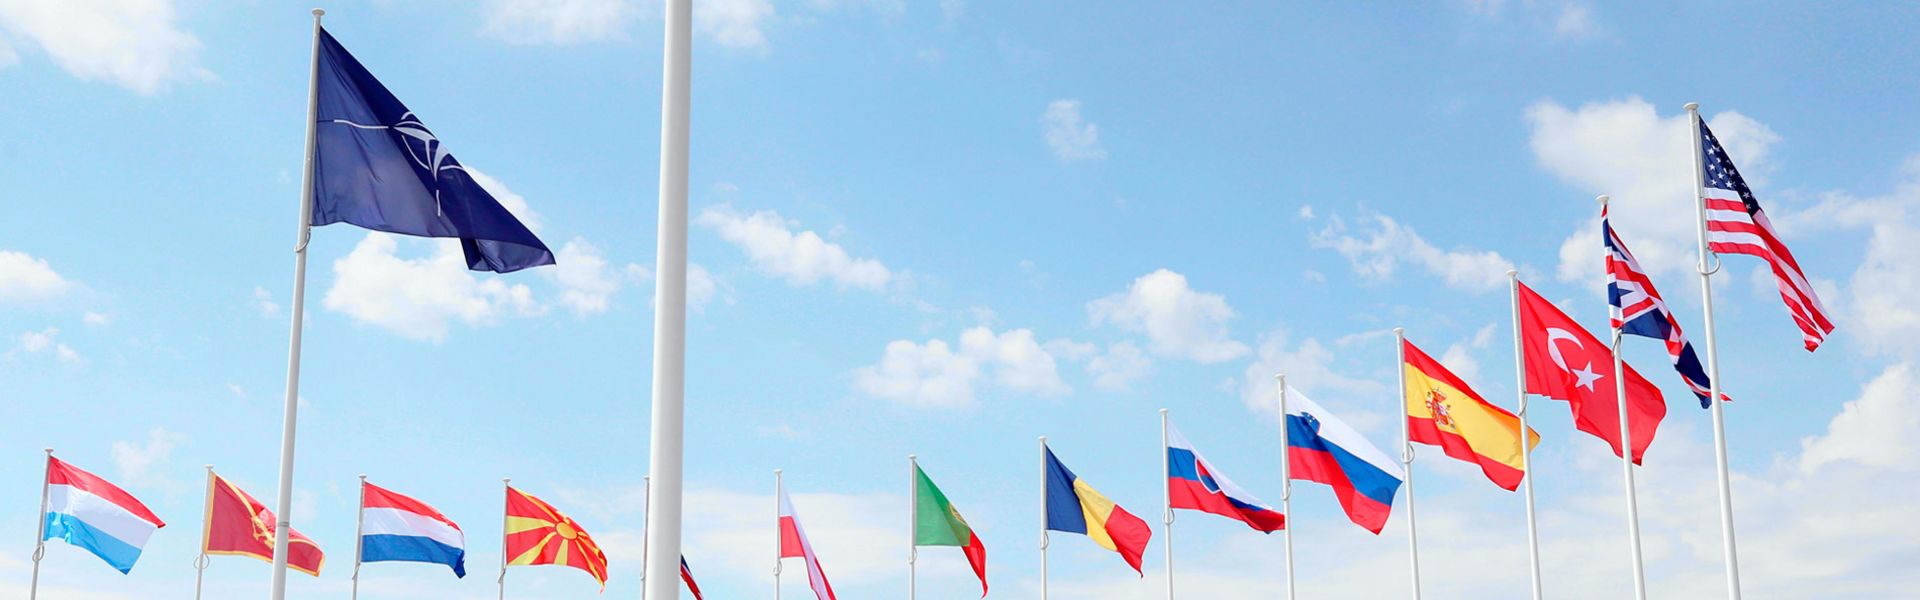 The flags of members of North Atlantic Treaty Organization (NATO) are seen at the Headquarter of NATO in Brussels